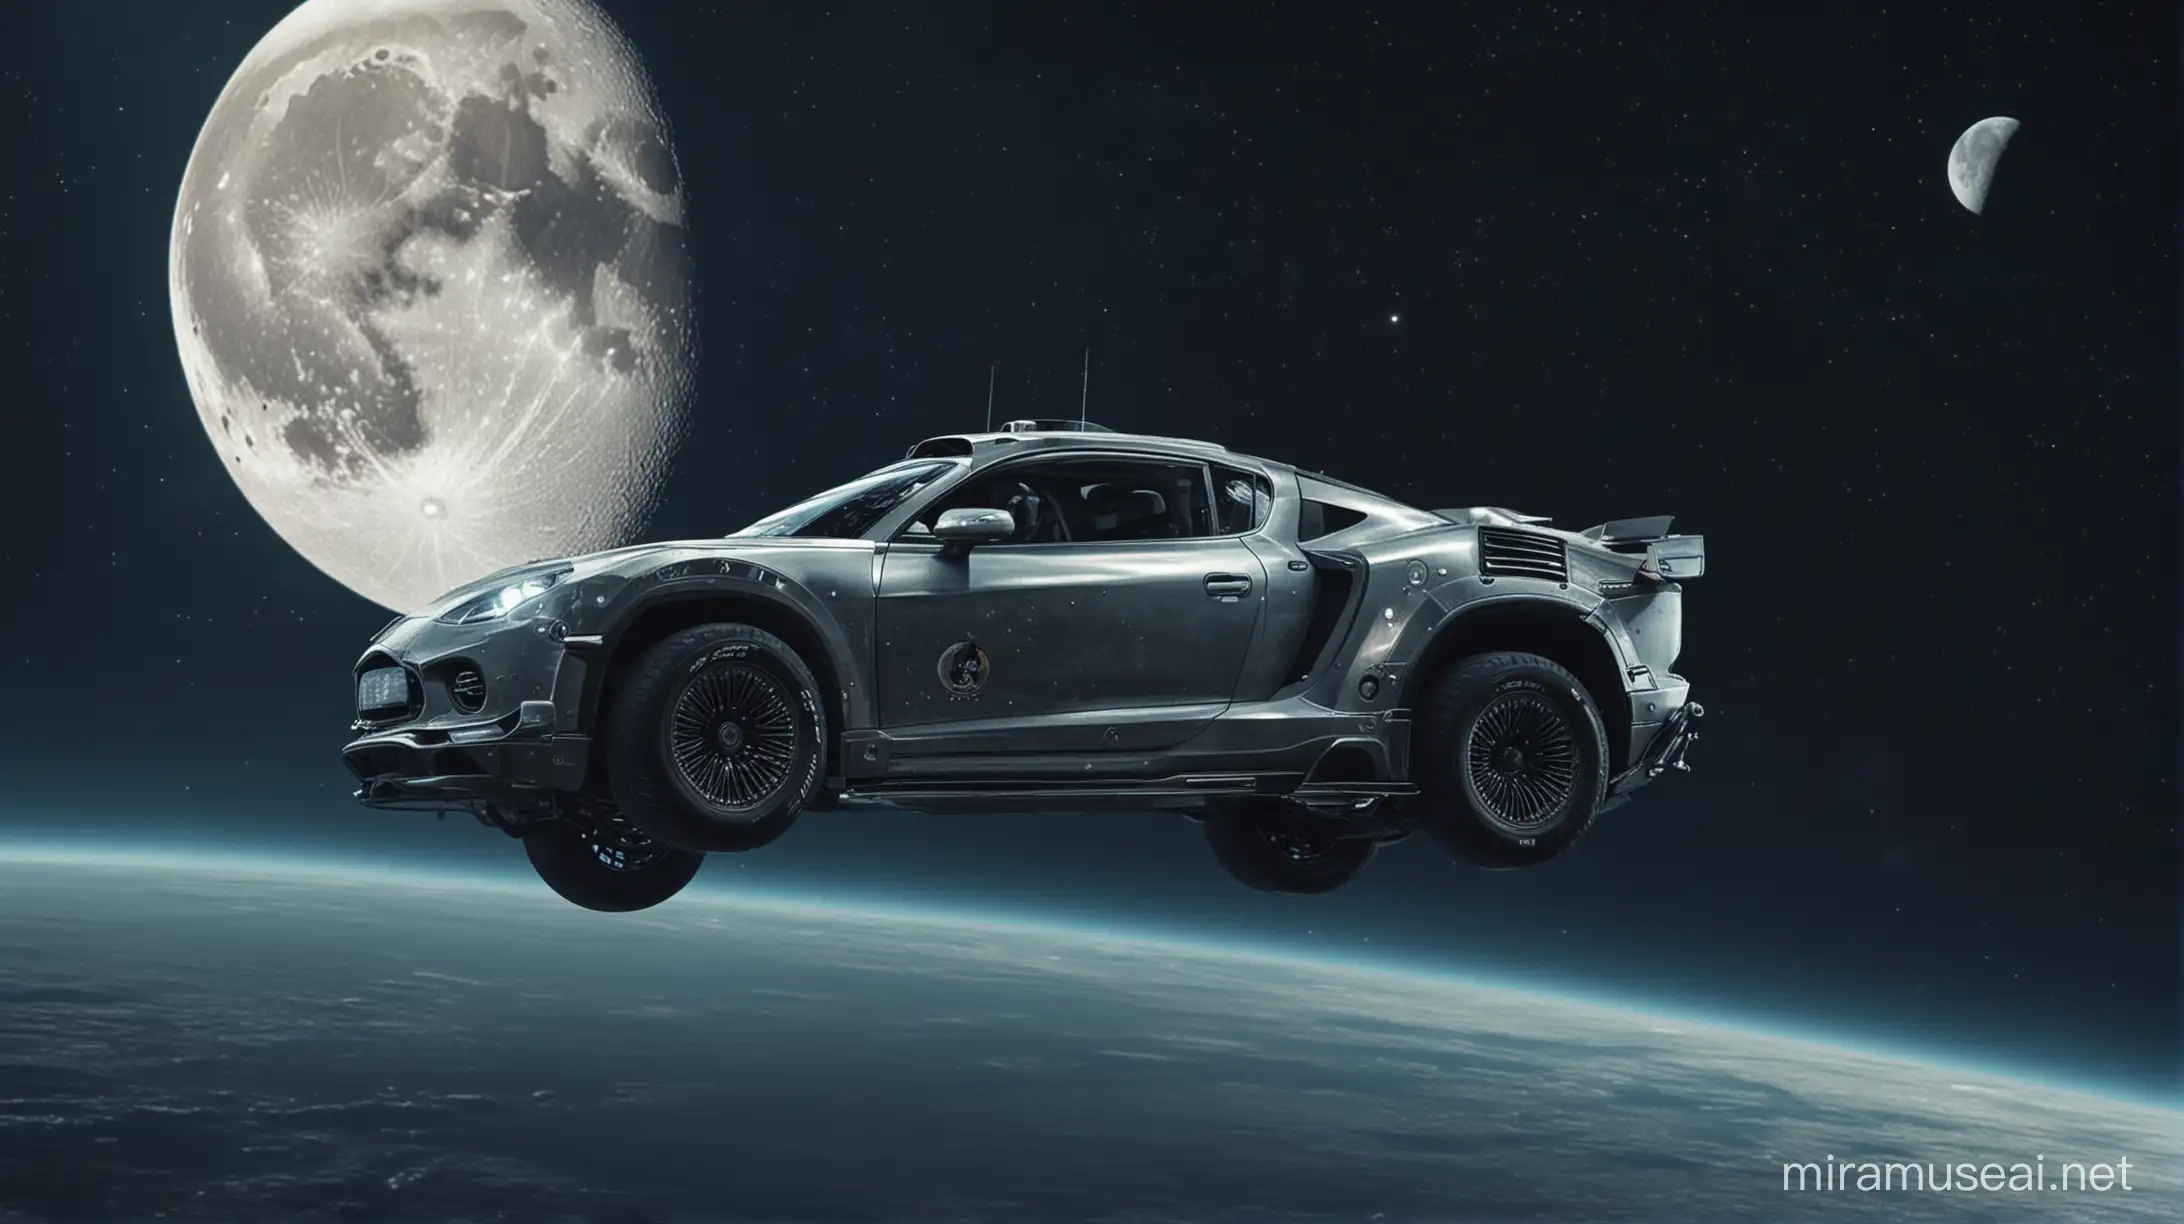 Car in space, moon in the background floating in space
